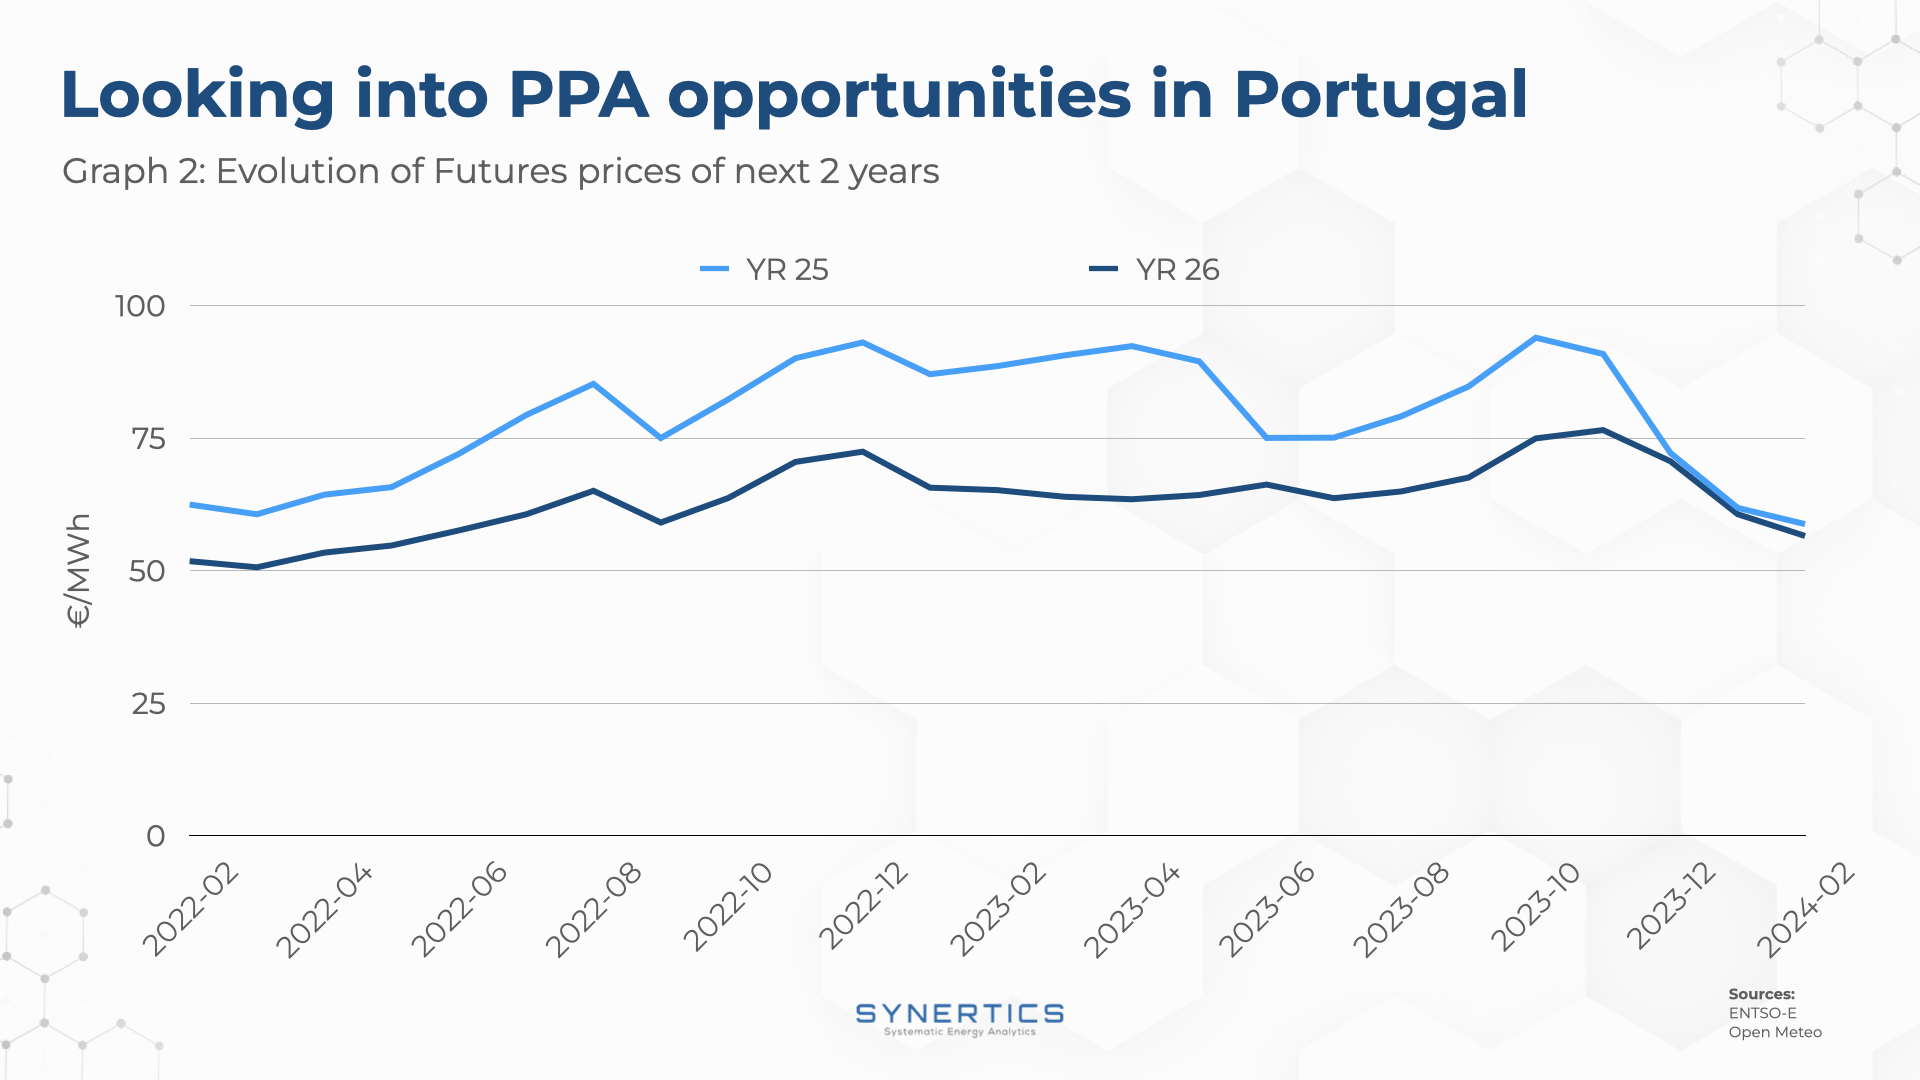 Evolution of Futures prices in Portugal